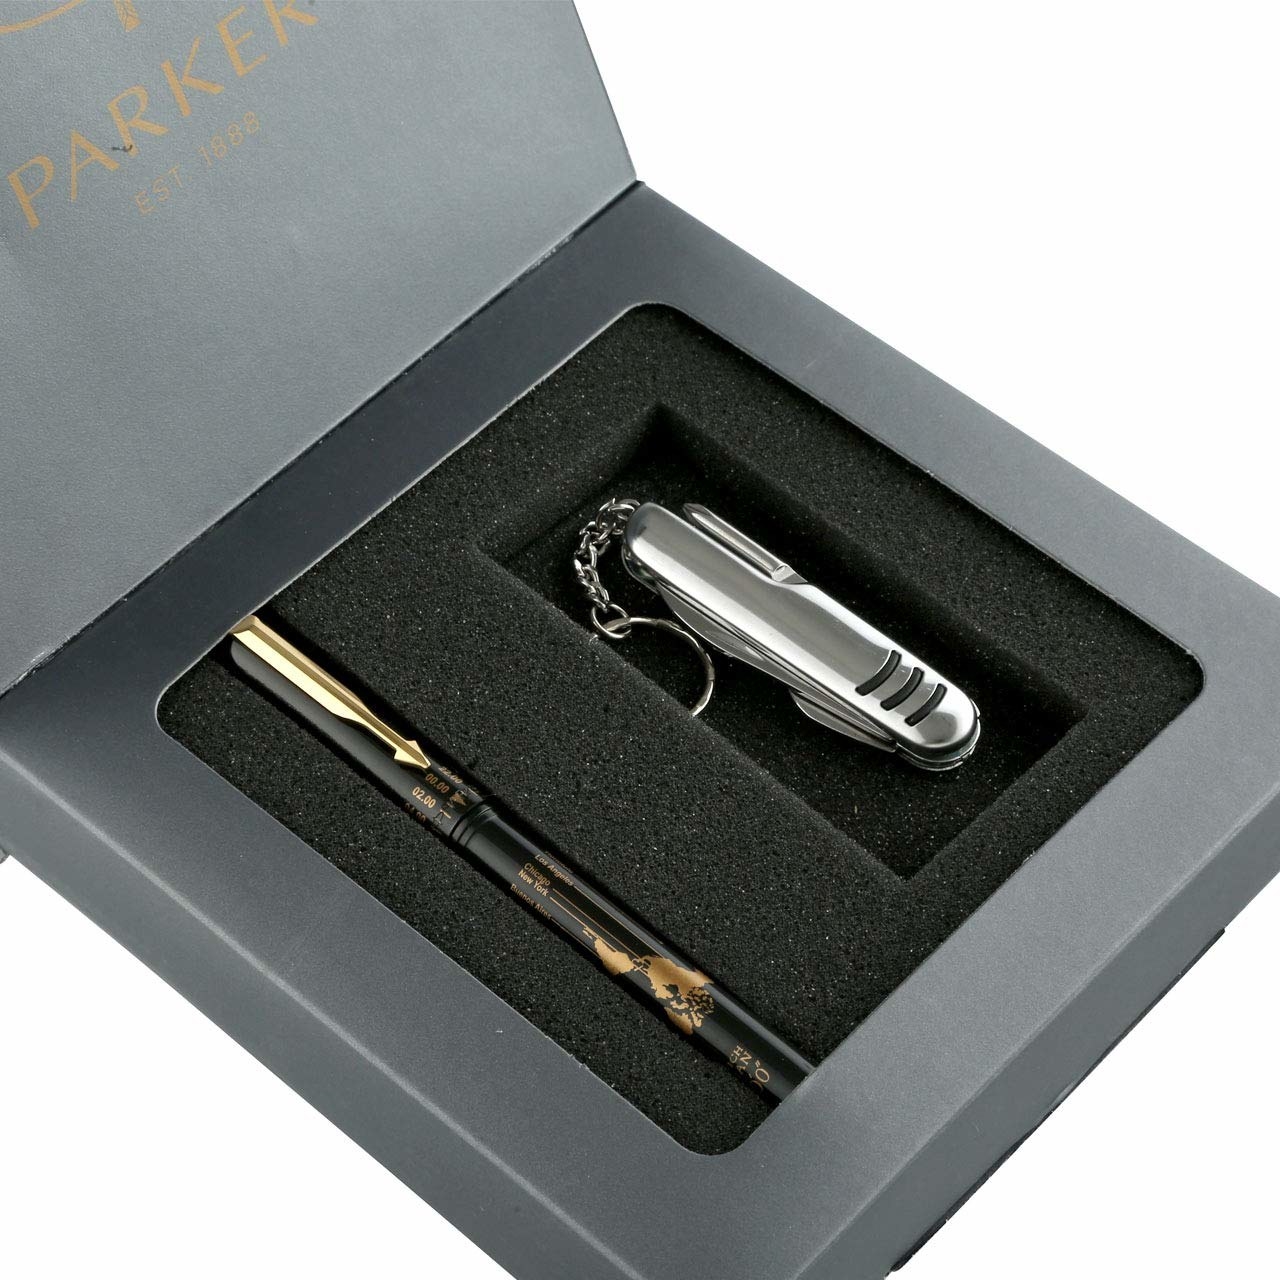 A Parker ball point pen in black and a Swiss Knife in a grey box.